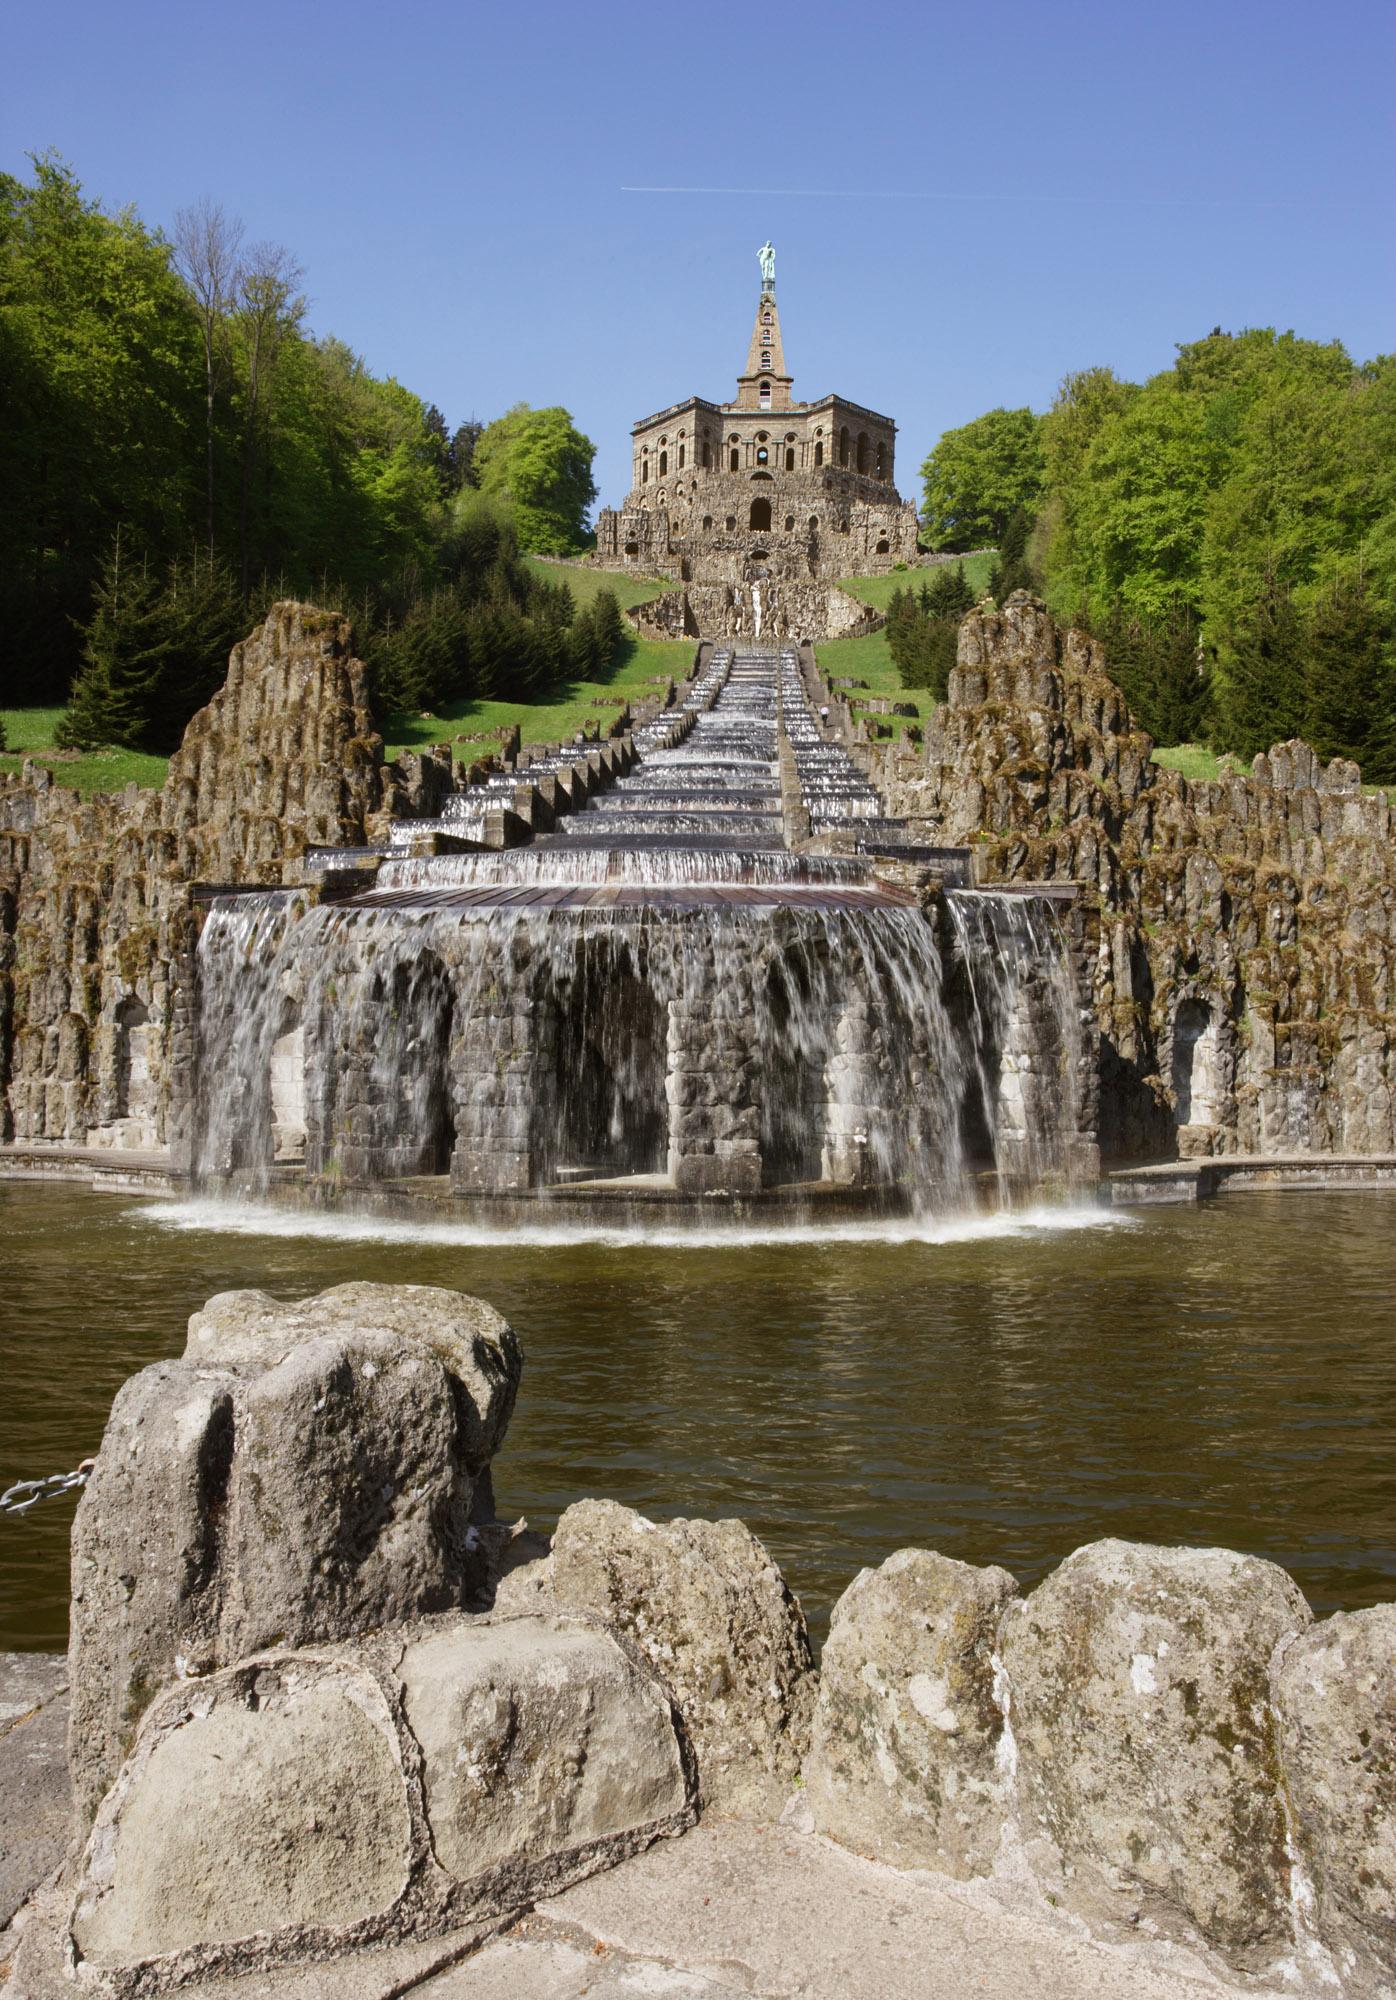 The water features start at the Hercules monument and the baroque cascades. – © Arno Hensmanns, MHK